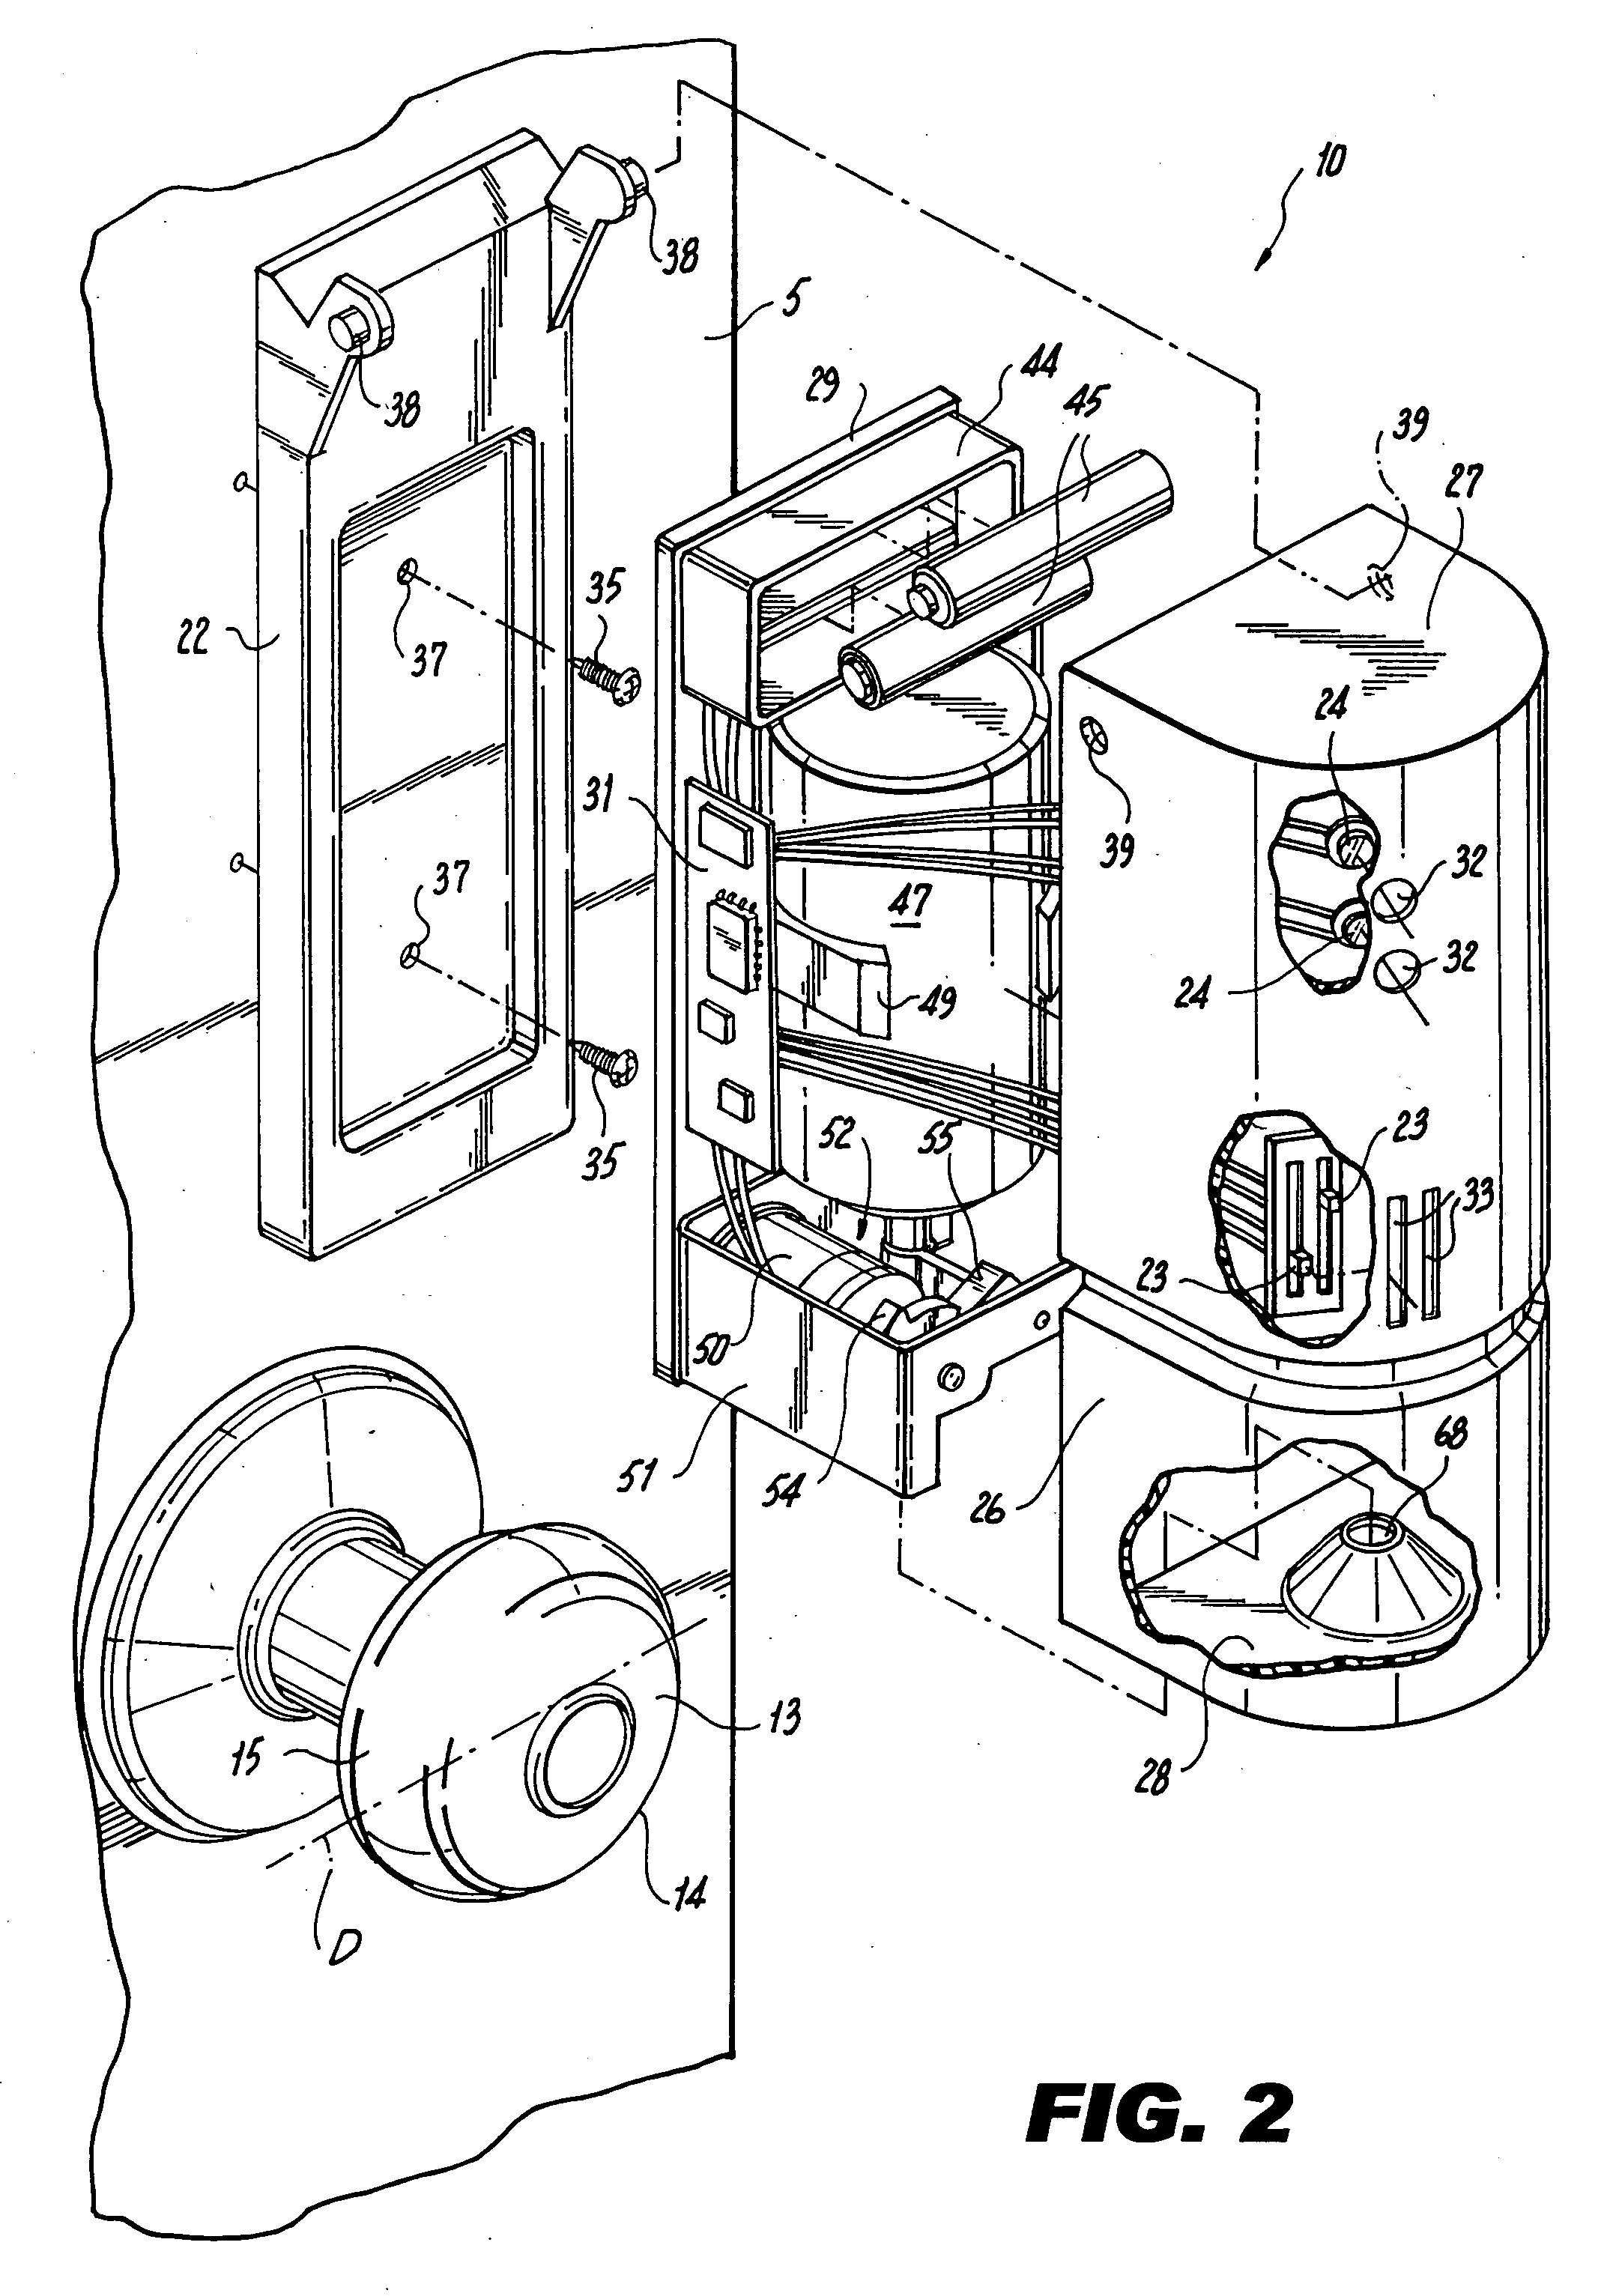 Door handle sanitizer system and apparatus